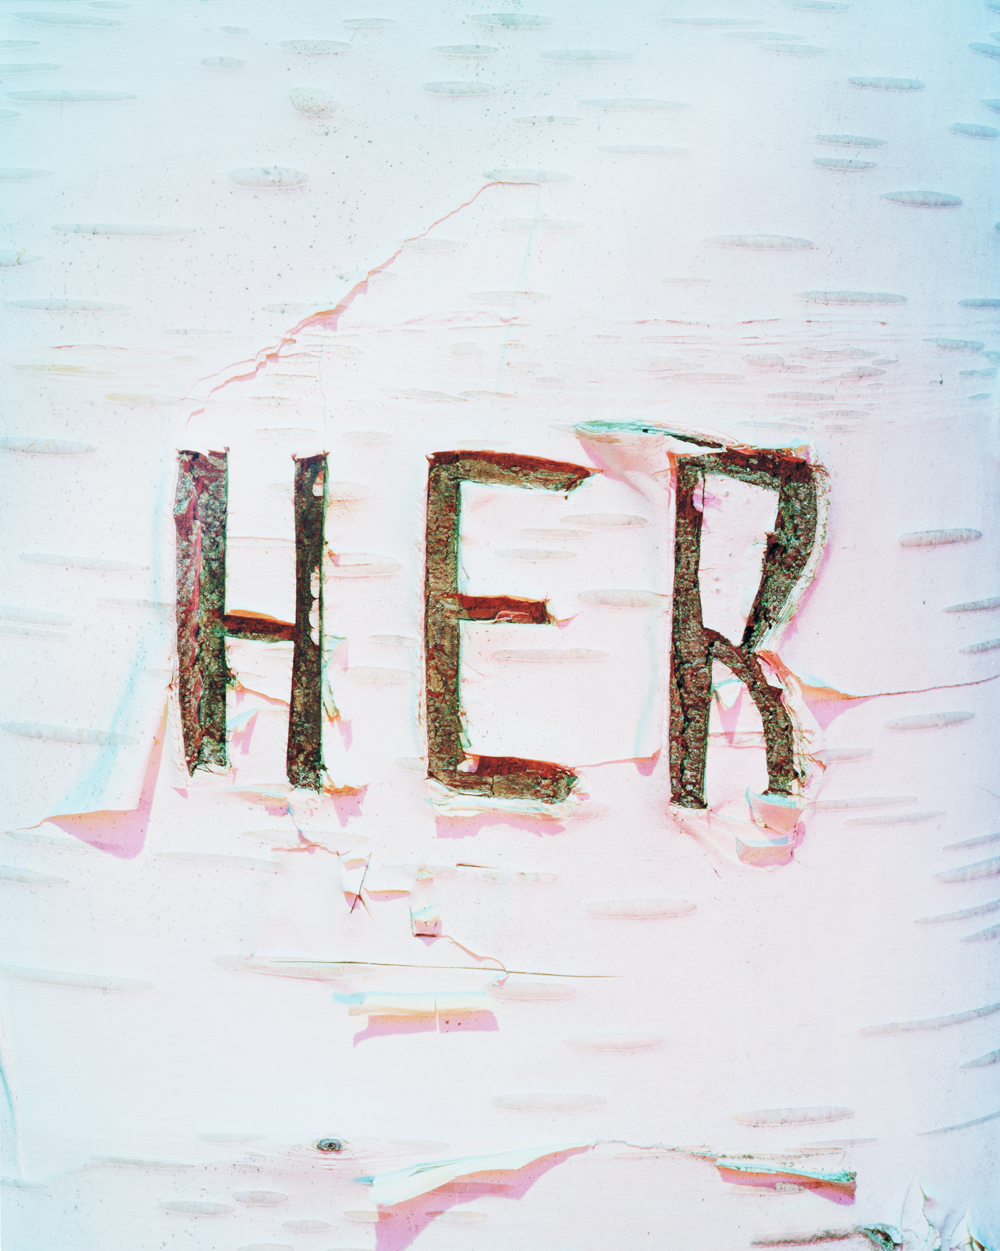 Eirik Johnson, HER, 2014, archival pigment print, 20 x 16 inches, edition of 5, $2950.